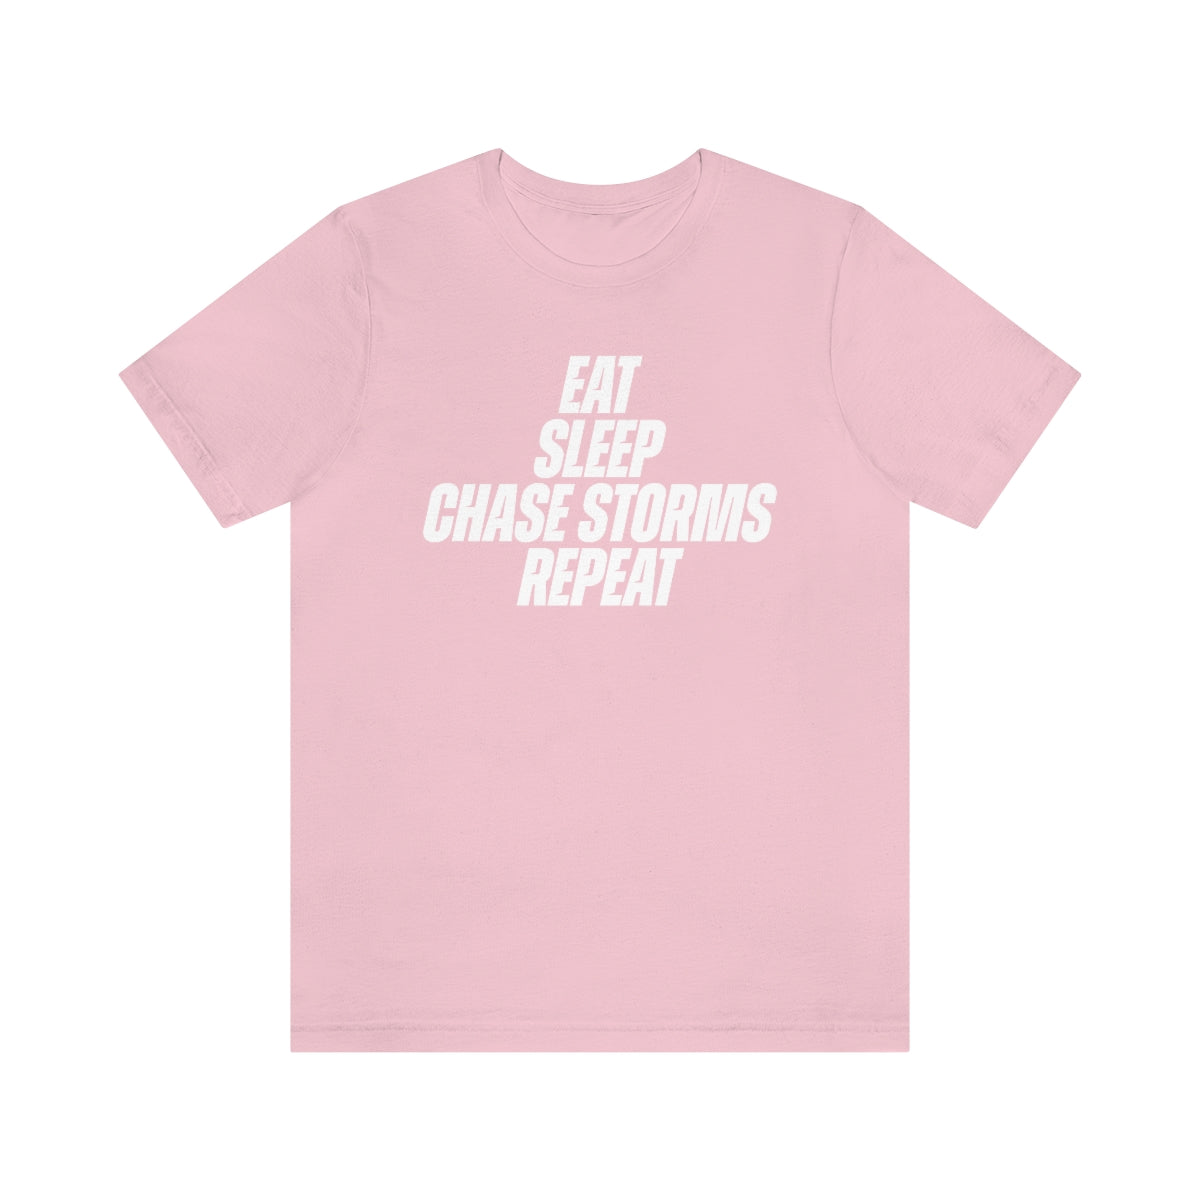 Eat, Sleep, Chase Storms Repeat Tee 